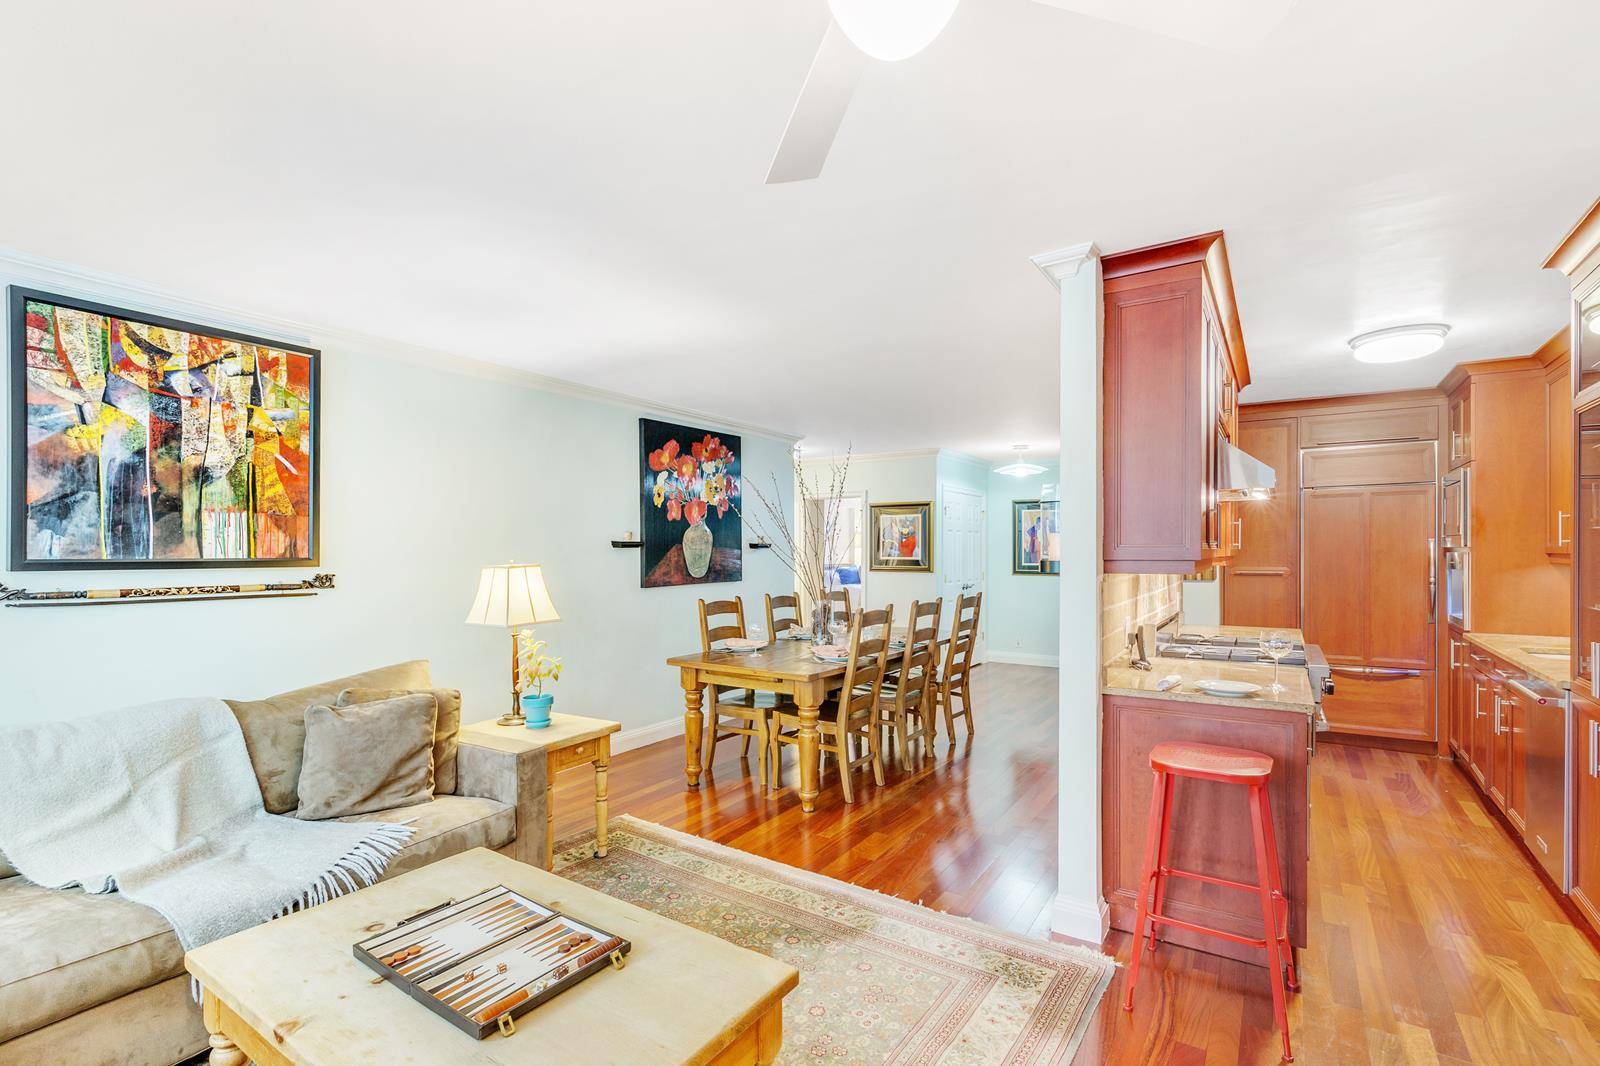 Welcome home ! This large, renovated 2 bedroom 2 bathroom home is a retreat from the hustle and bustle of the city.